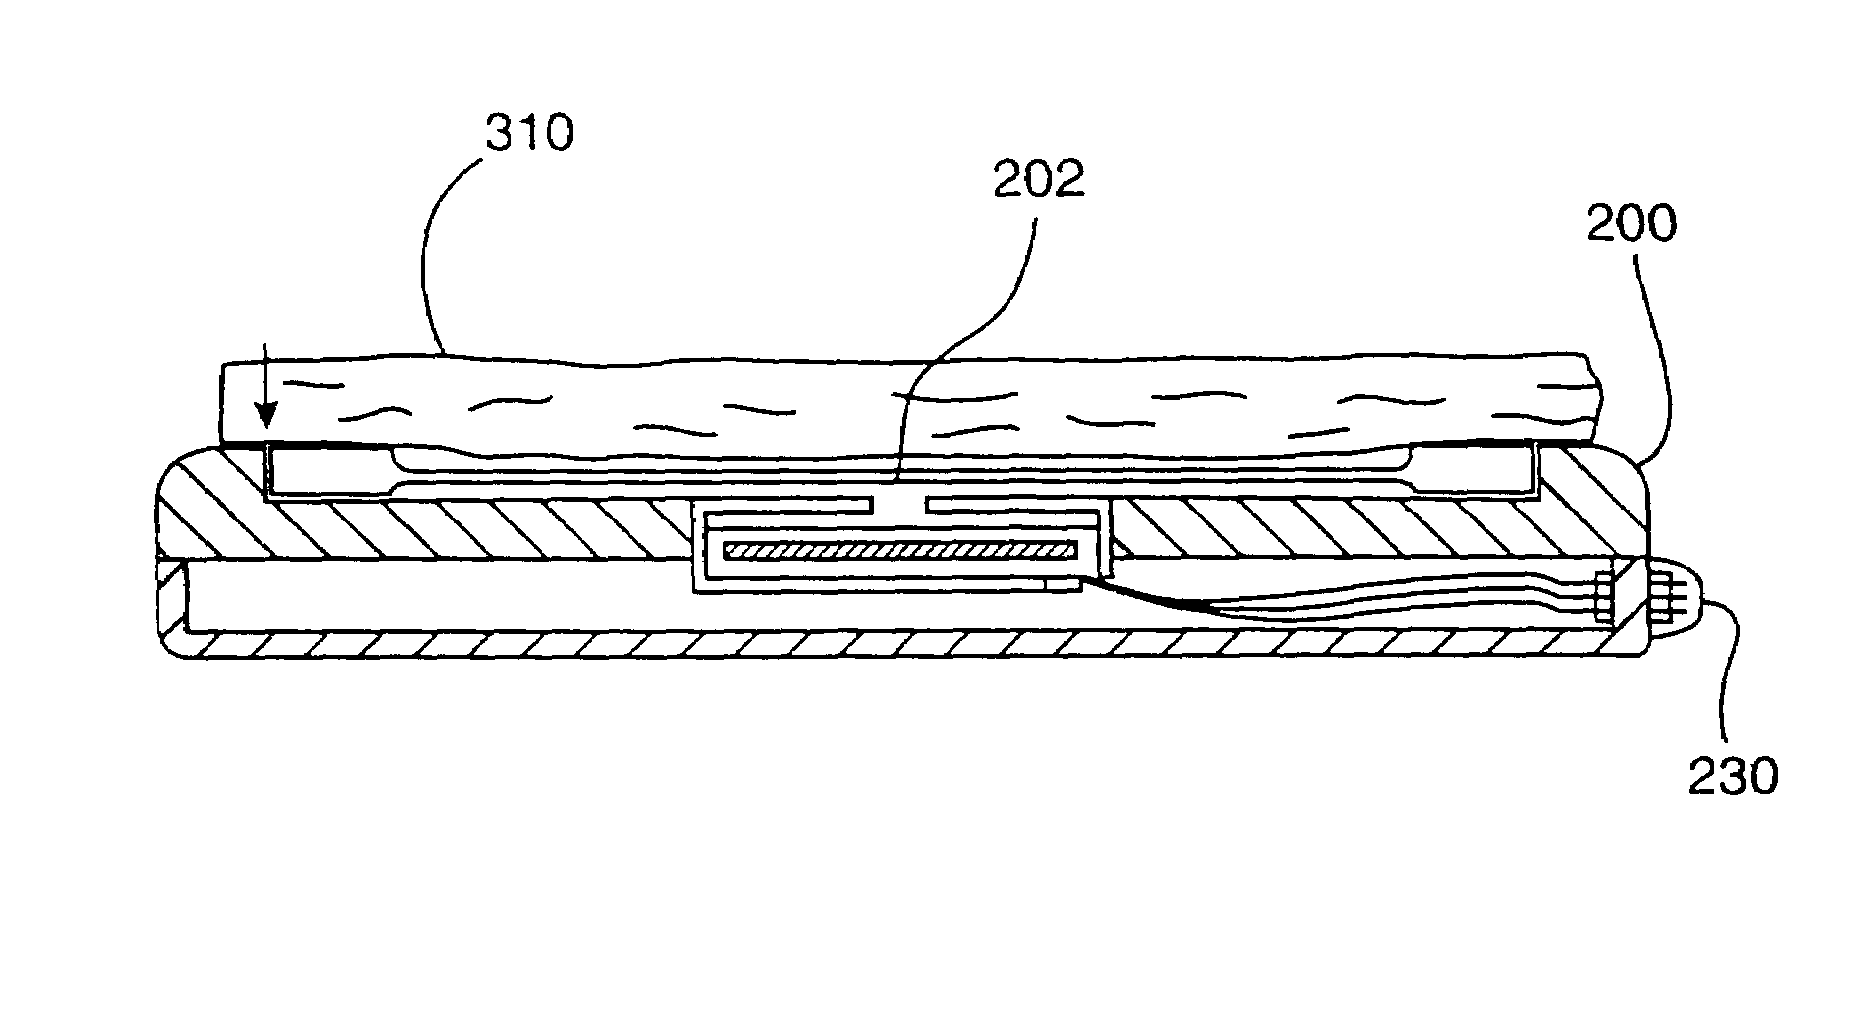 Implantable microphone having sensitivity and frequency response